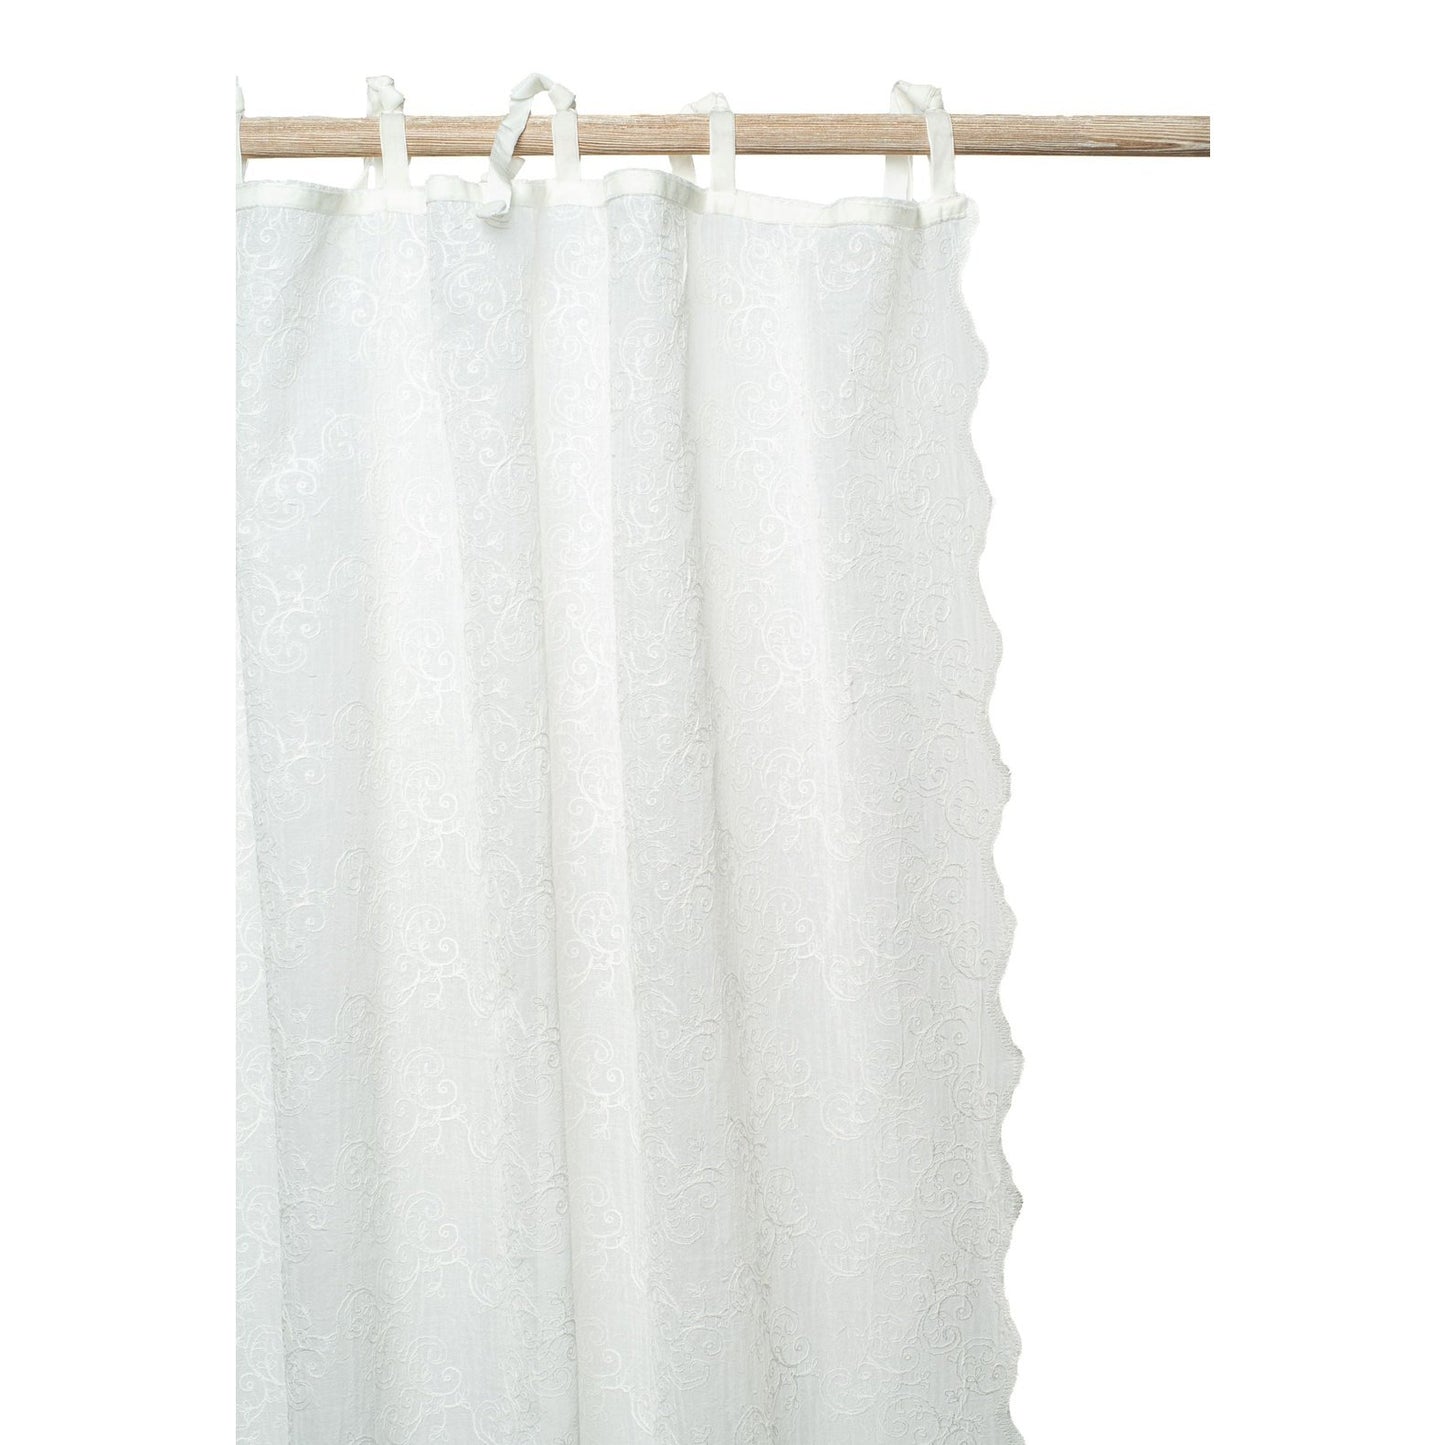 The Camille embroidered voile curtain adds that special touch to your window. Its design is both timeless as well as contemporary and will fit in any interior. Finished with velvet ribbons and a lovely scallop on both lengths.